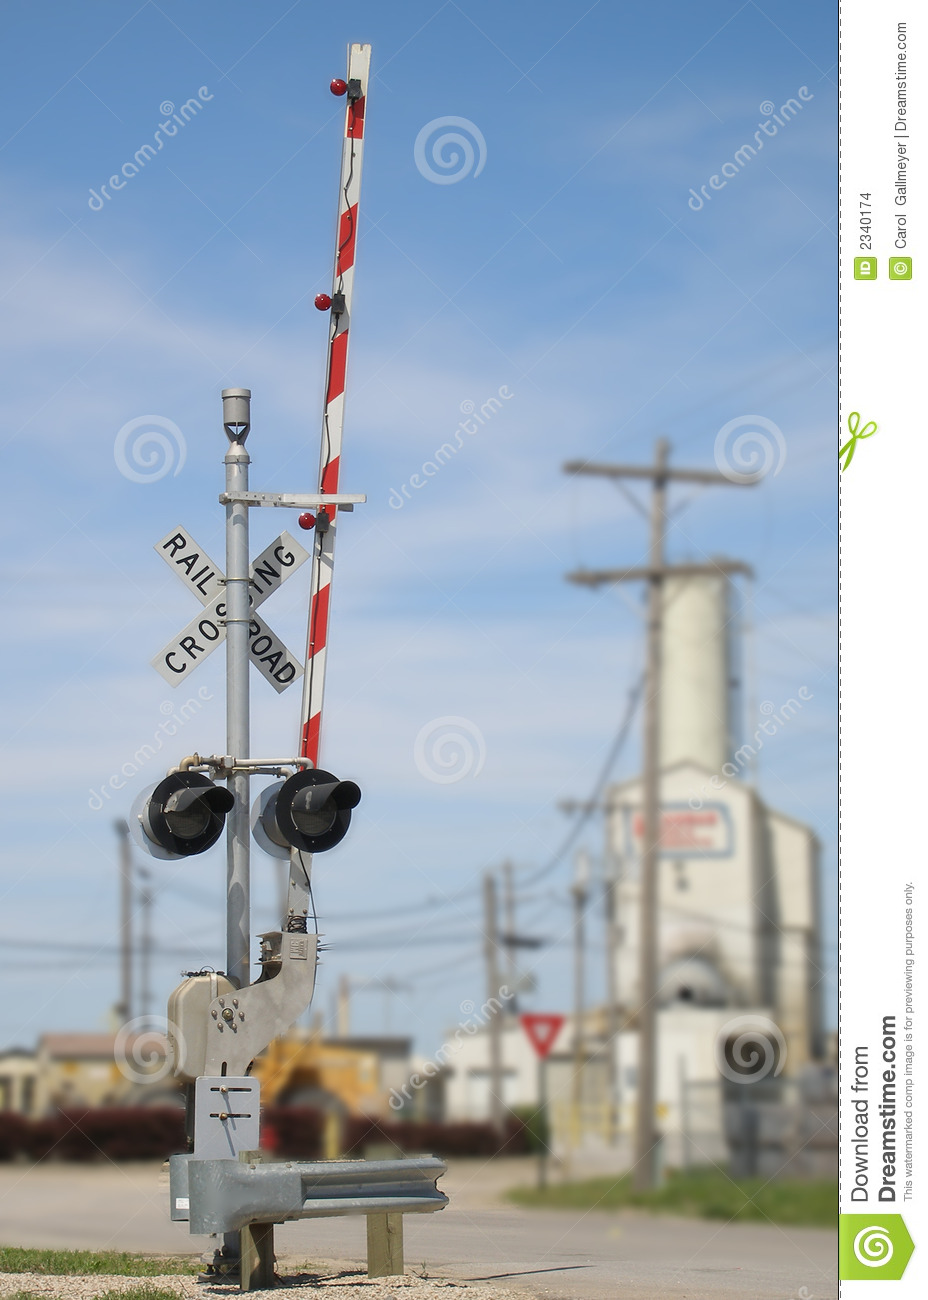 Railroad Crossing Signal Stock Images   Image  2340174